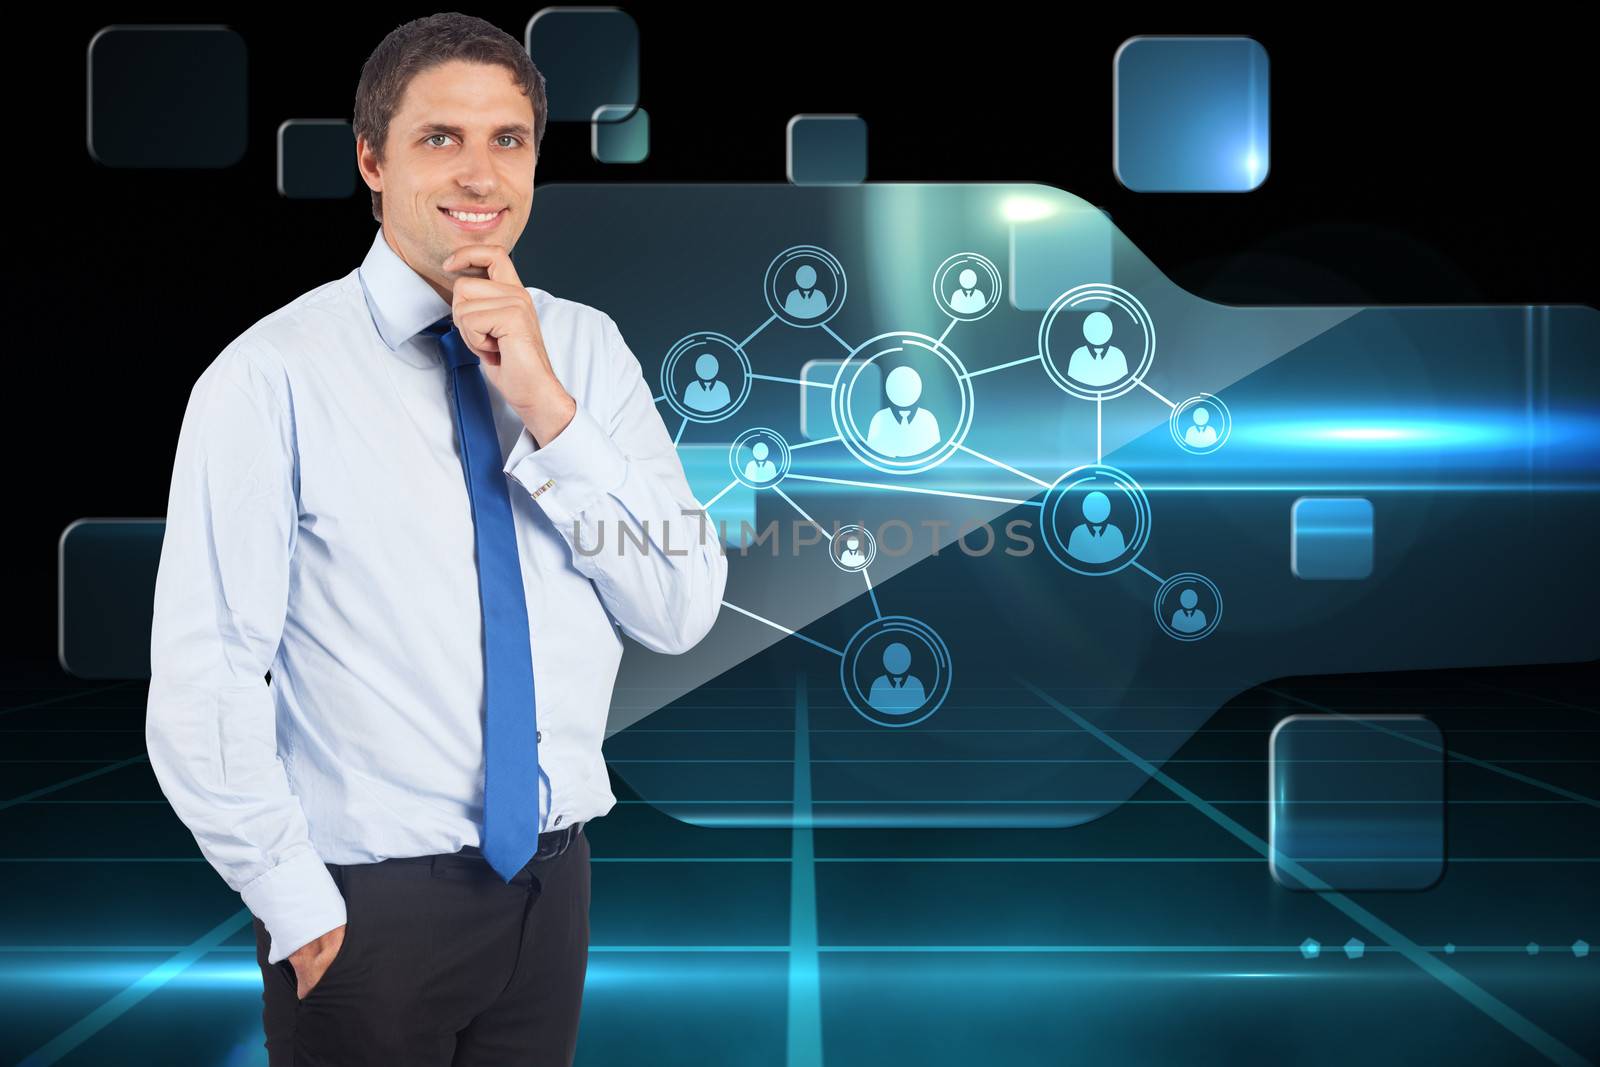 Thinking businessman touching his chin against futuristic technology interface